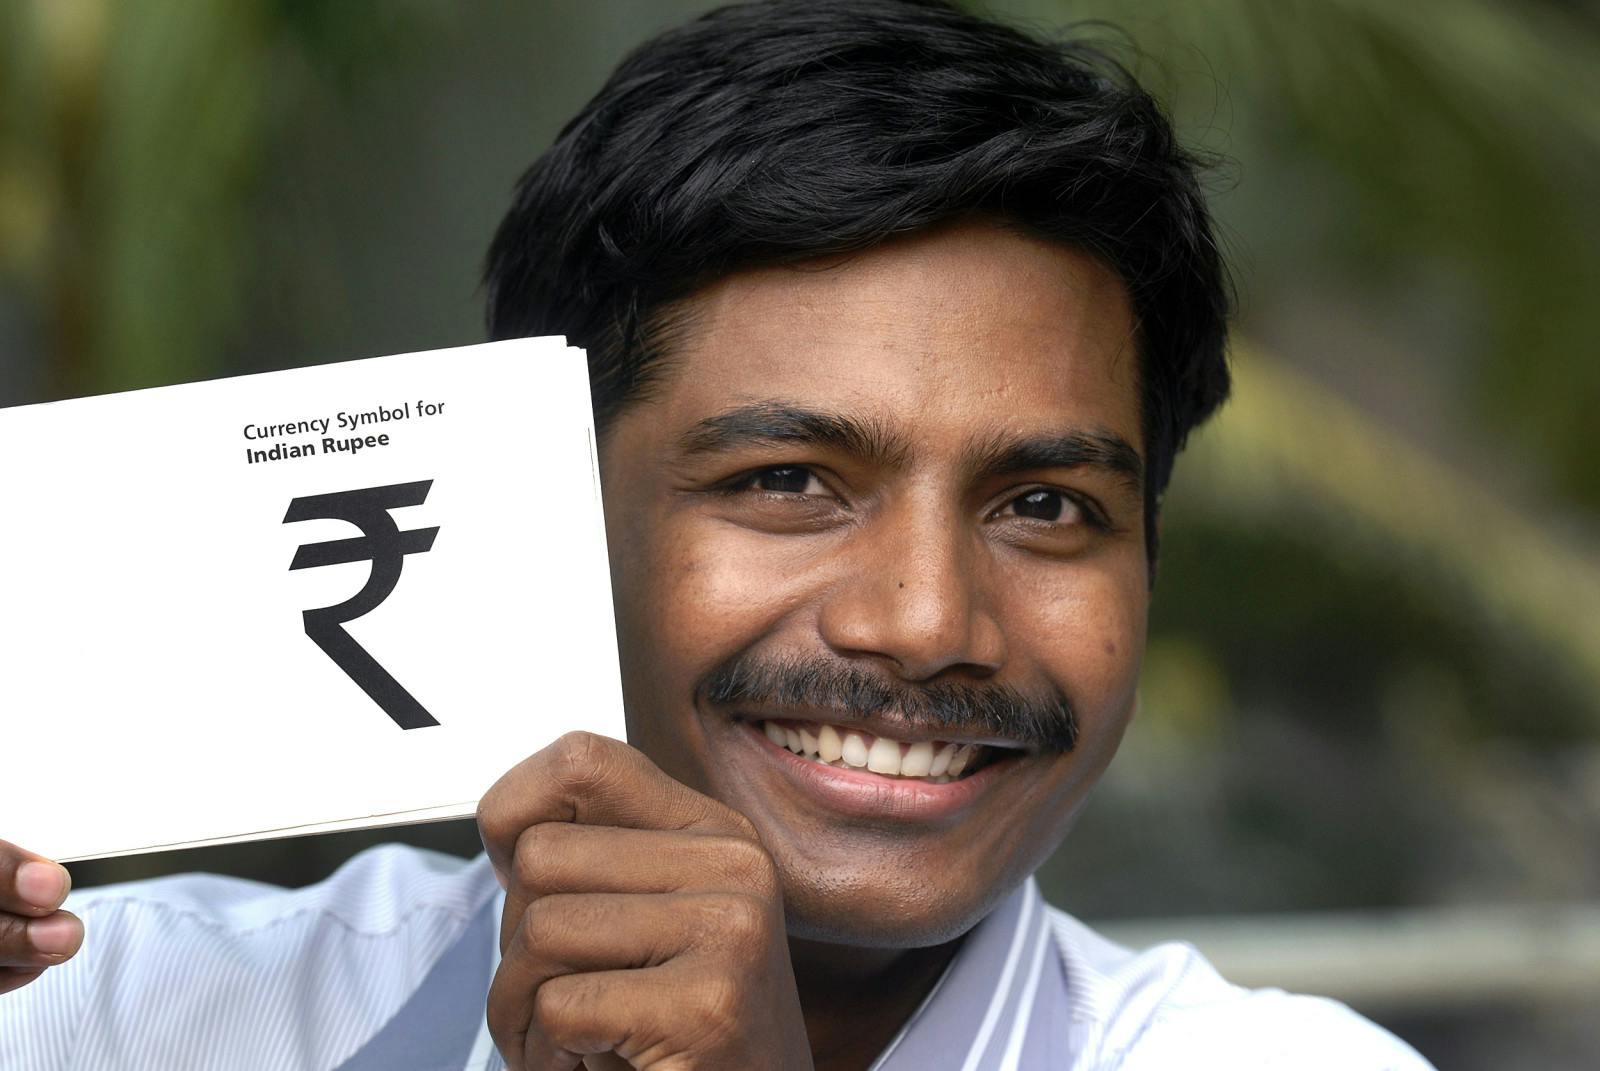 GettyImages-815826574 Indian Rupee Symbol